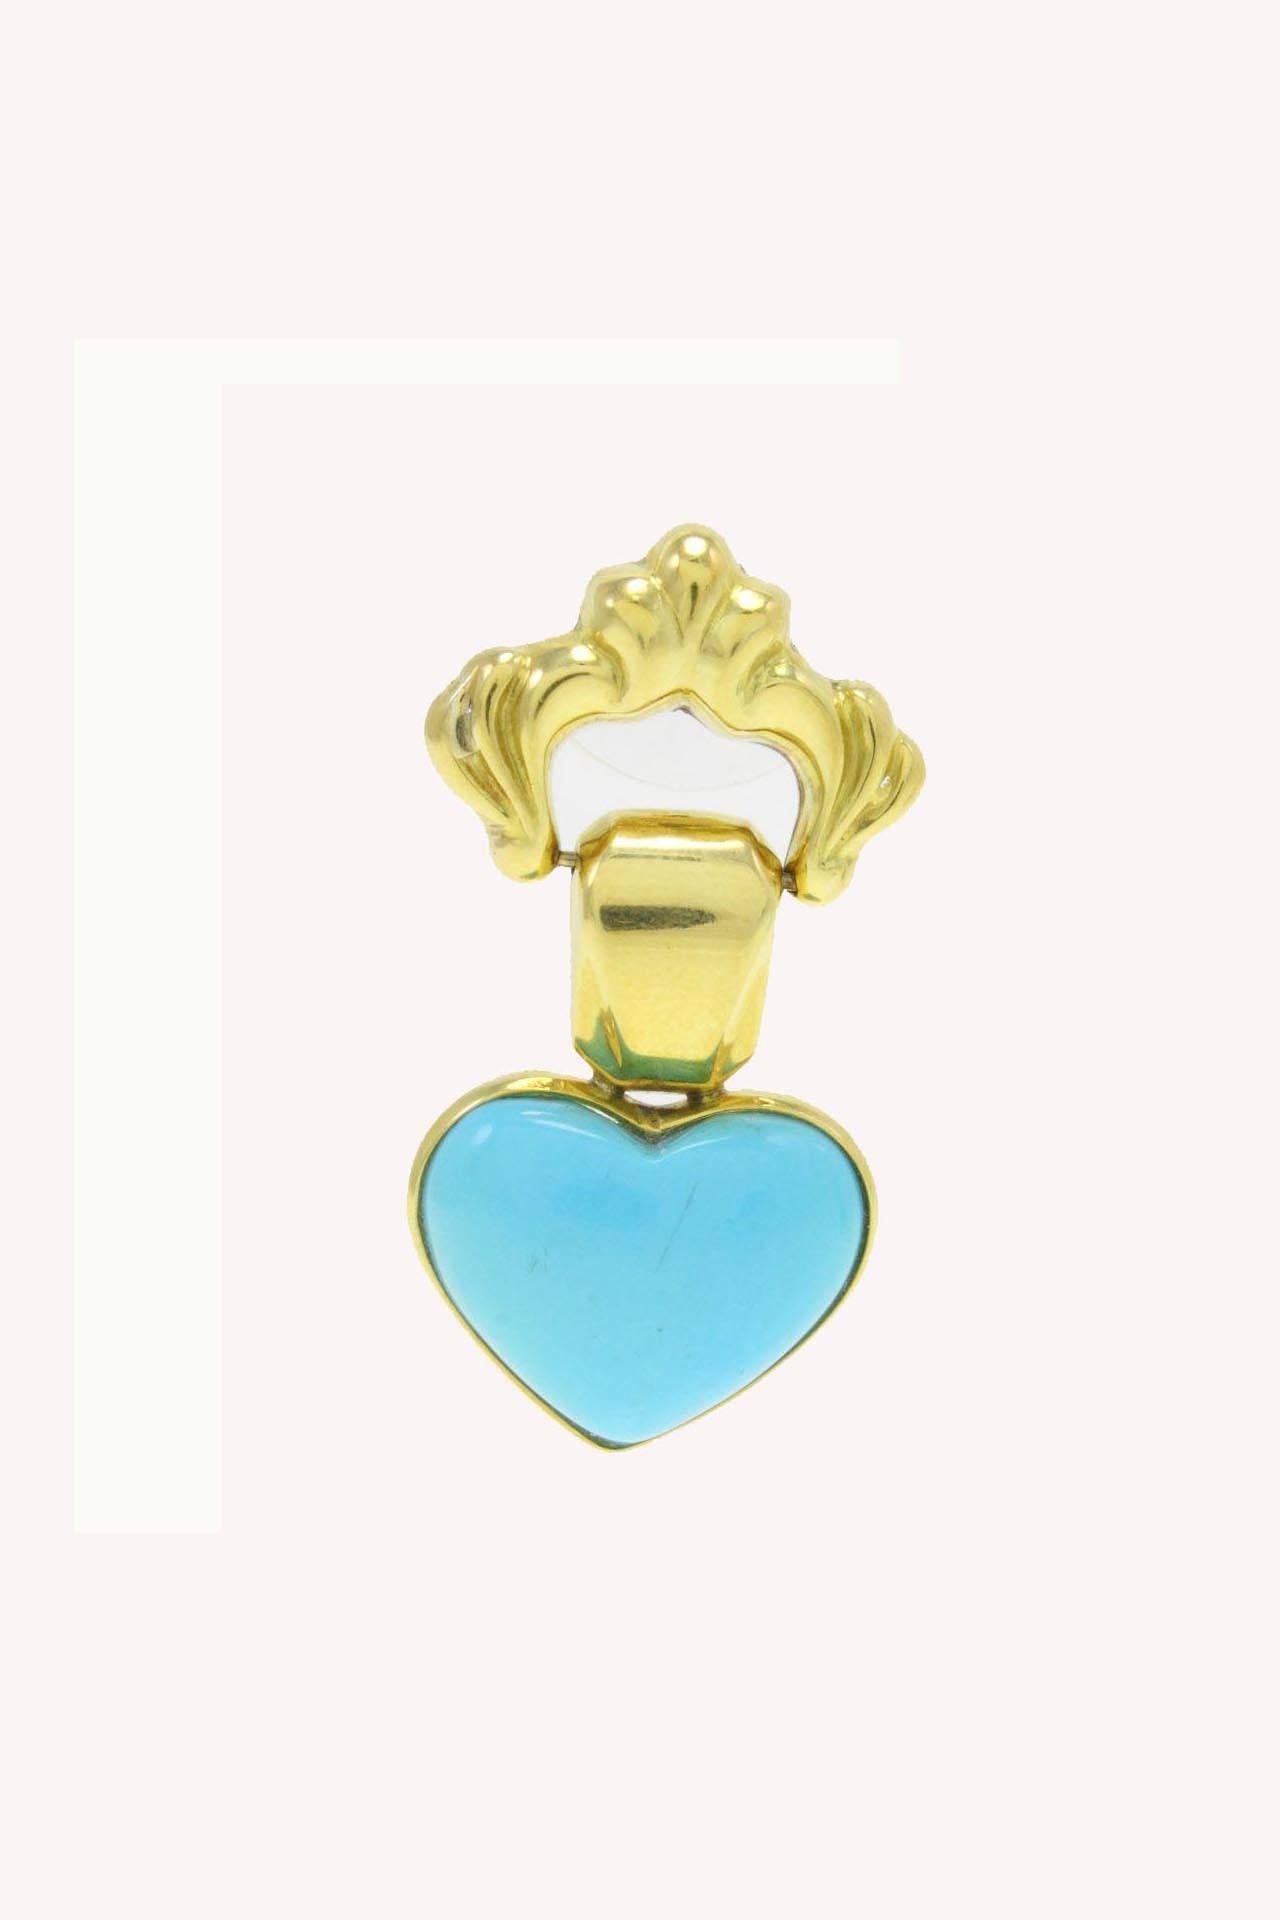 Heart shaped turquoise earrings in 18K  yellow gold.

turquoise (5.00 gr)
US Size
Width 0.71 inch
Length 1.53 inch
Ref.512259
Tot weight 11,50 g